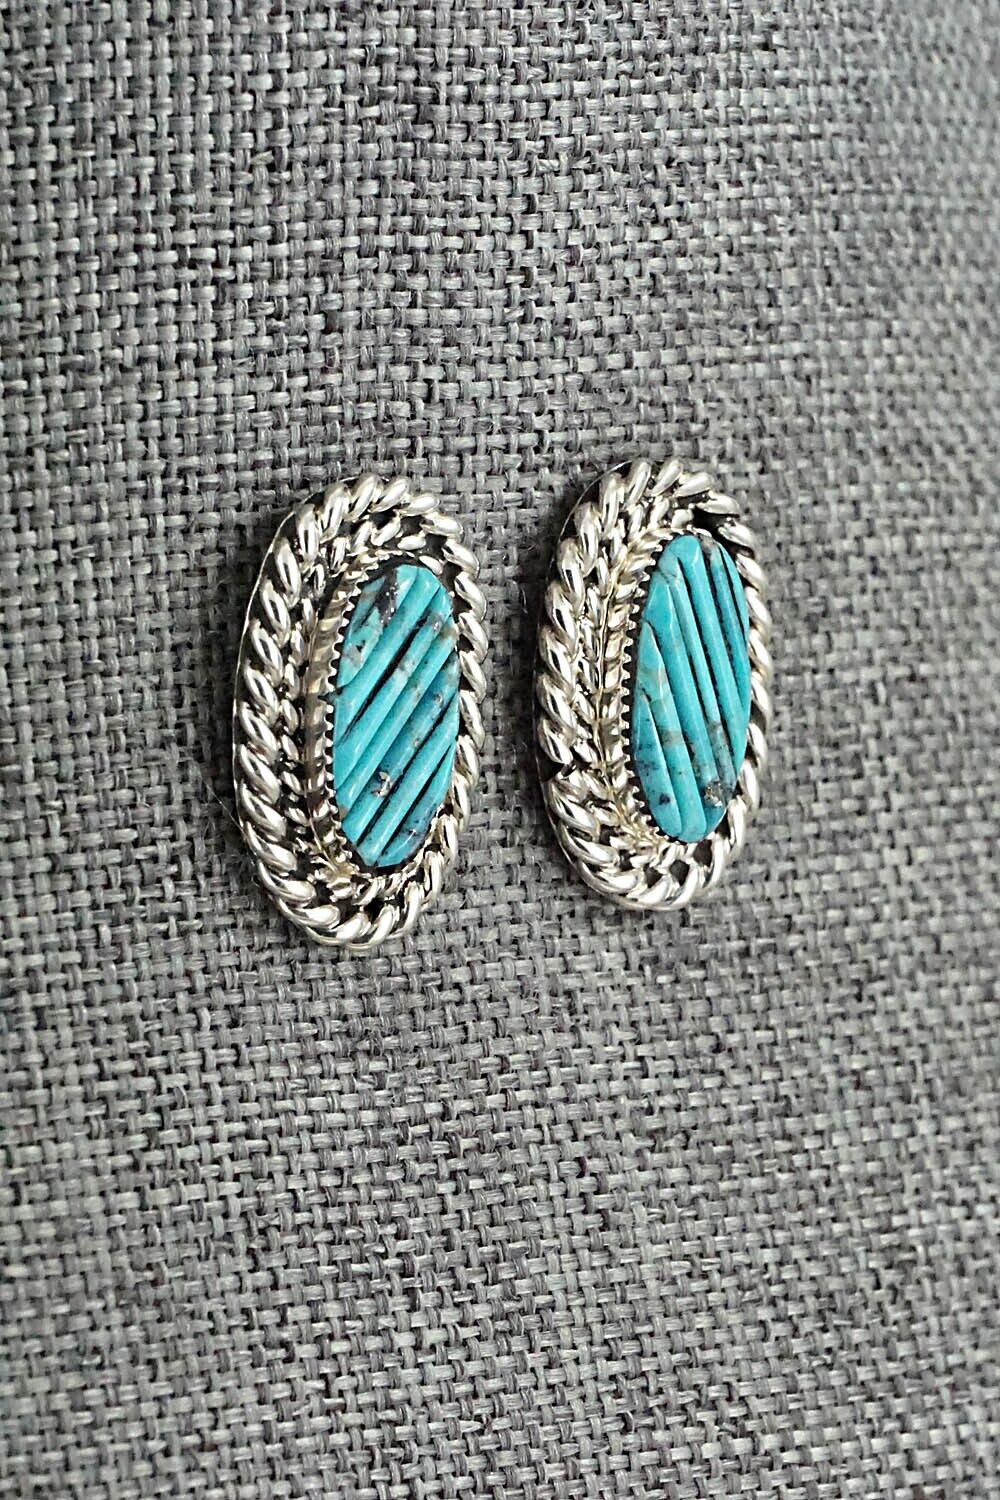 Turquoise & Sterling Silver Pendant and Earrings Set - Tom Lewis